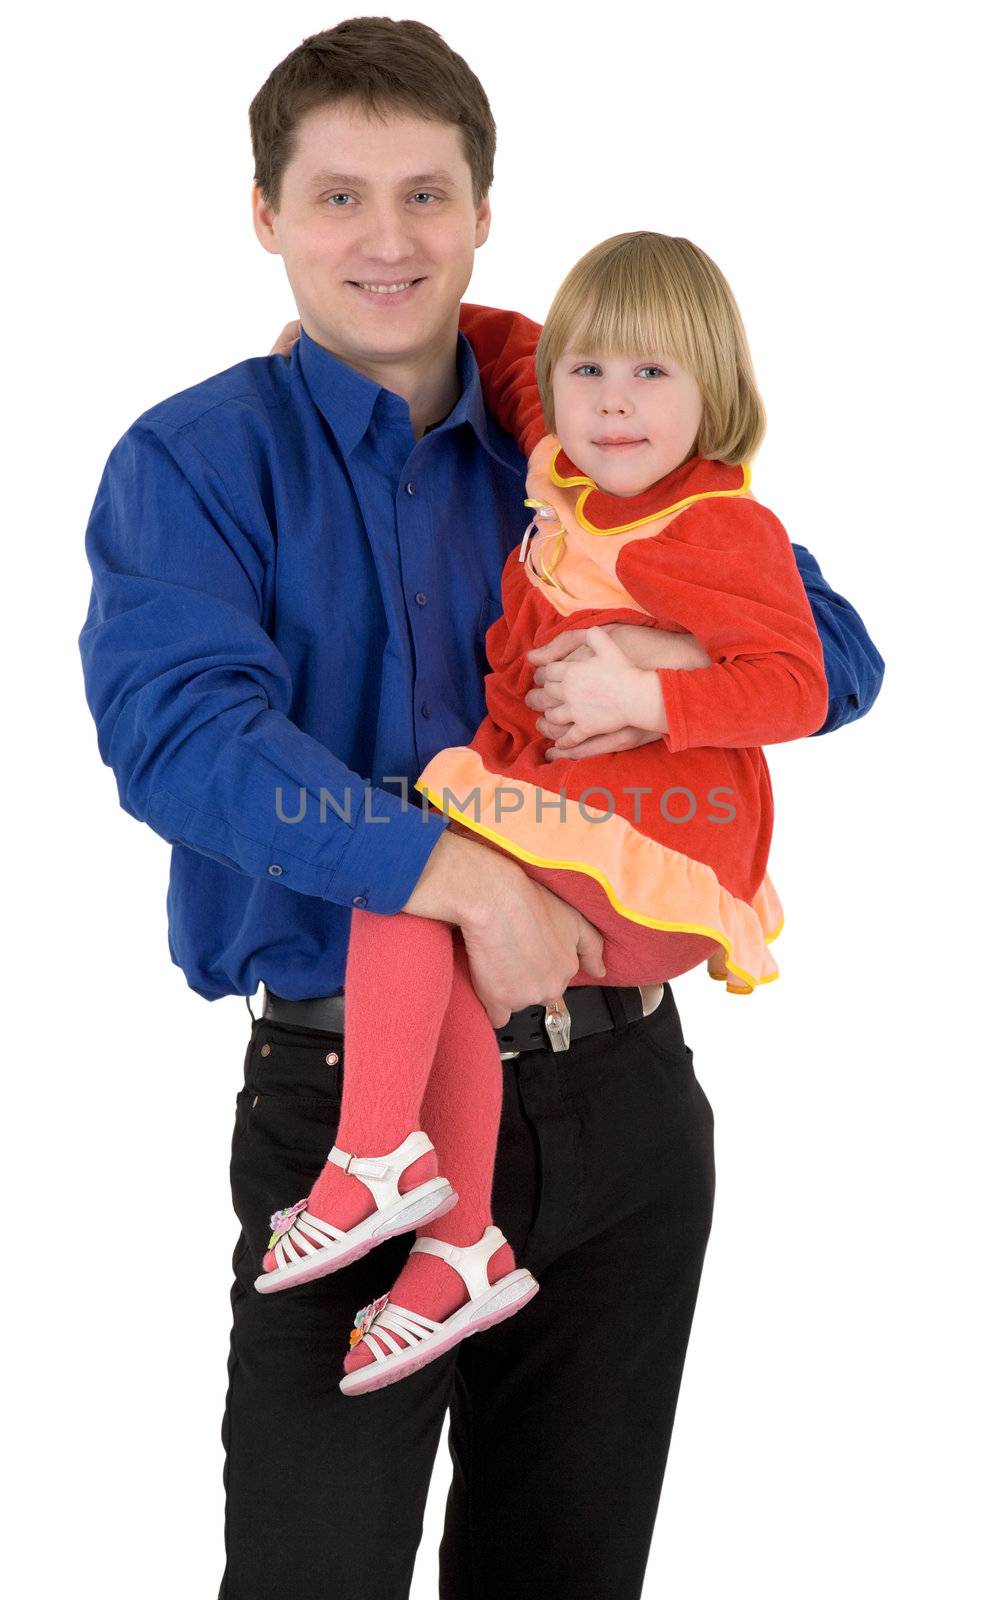 Man hold the girl on a white background